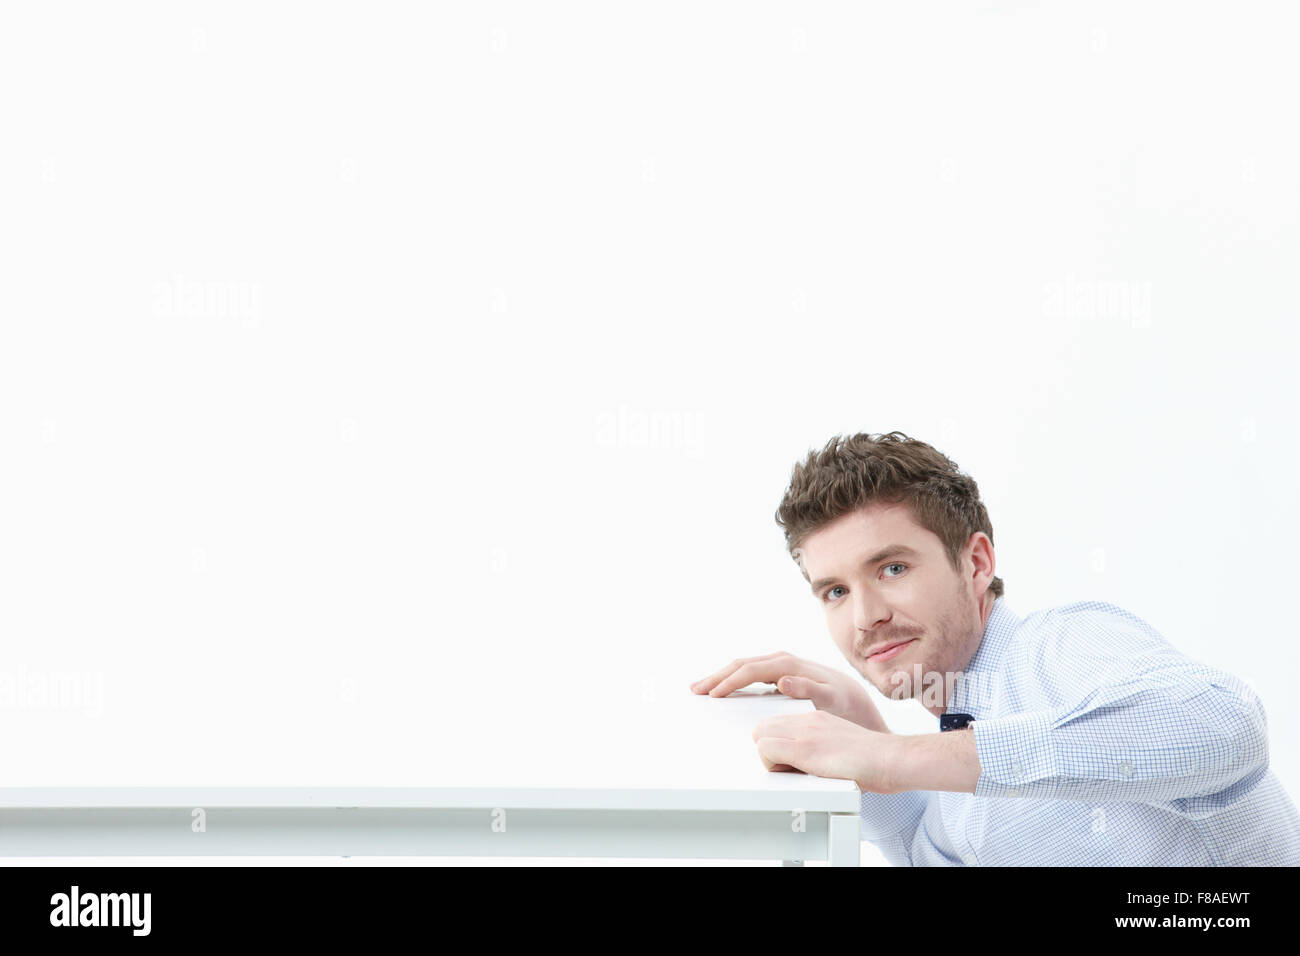 Smiling man sitting below at the right side of the desk Stock Photo